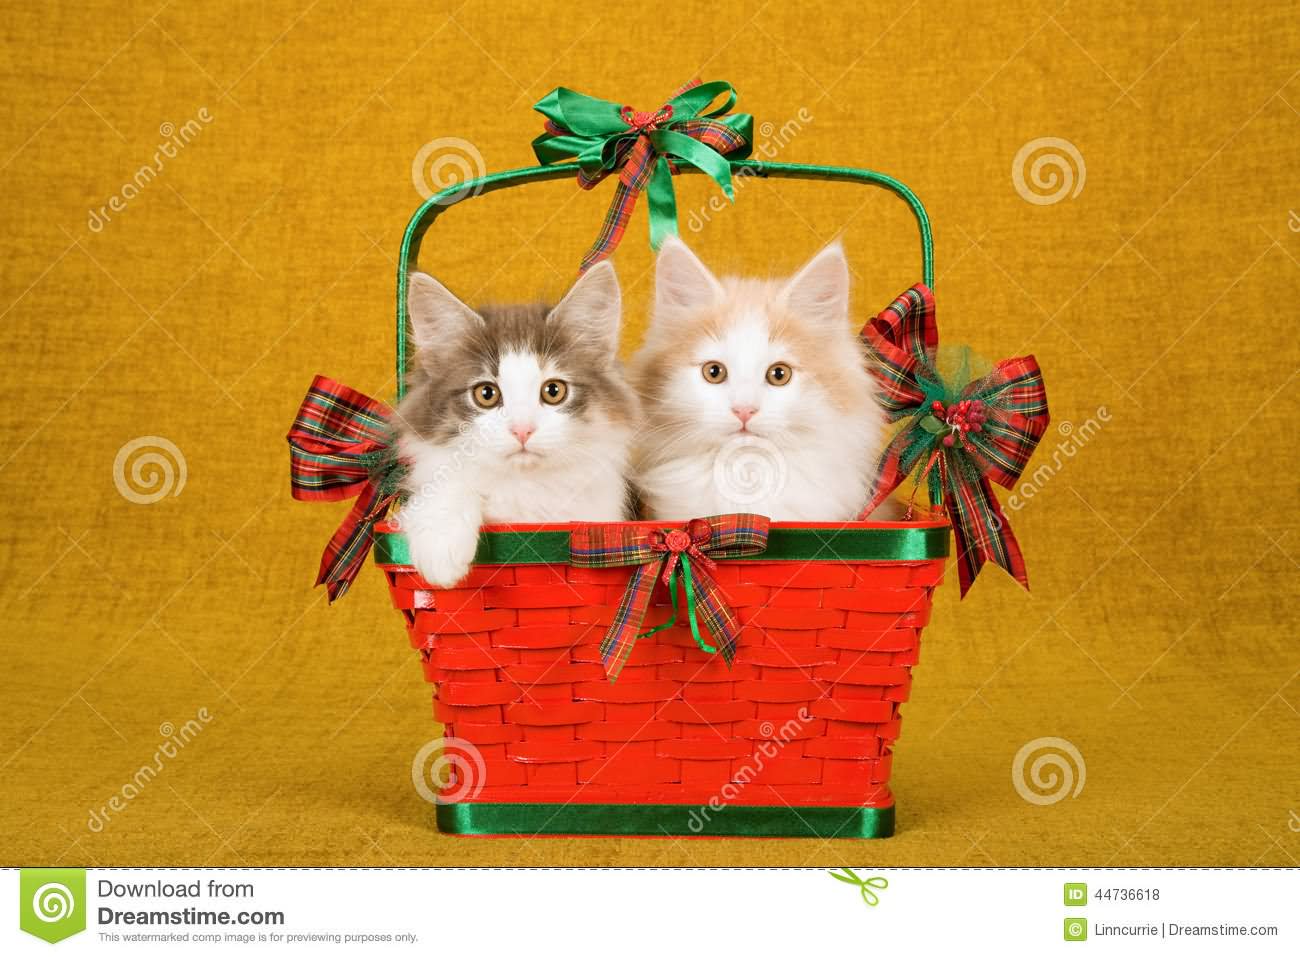 Two Norwegian Forest Cat Kittens Sitting In Red Christmas Basket